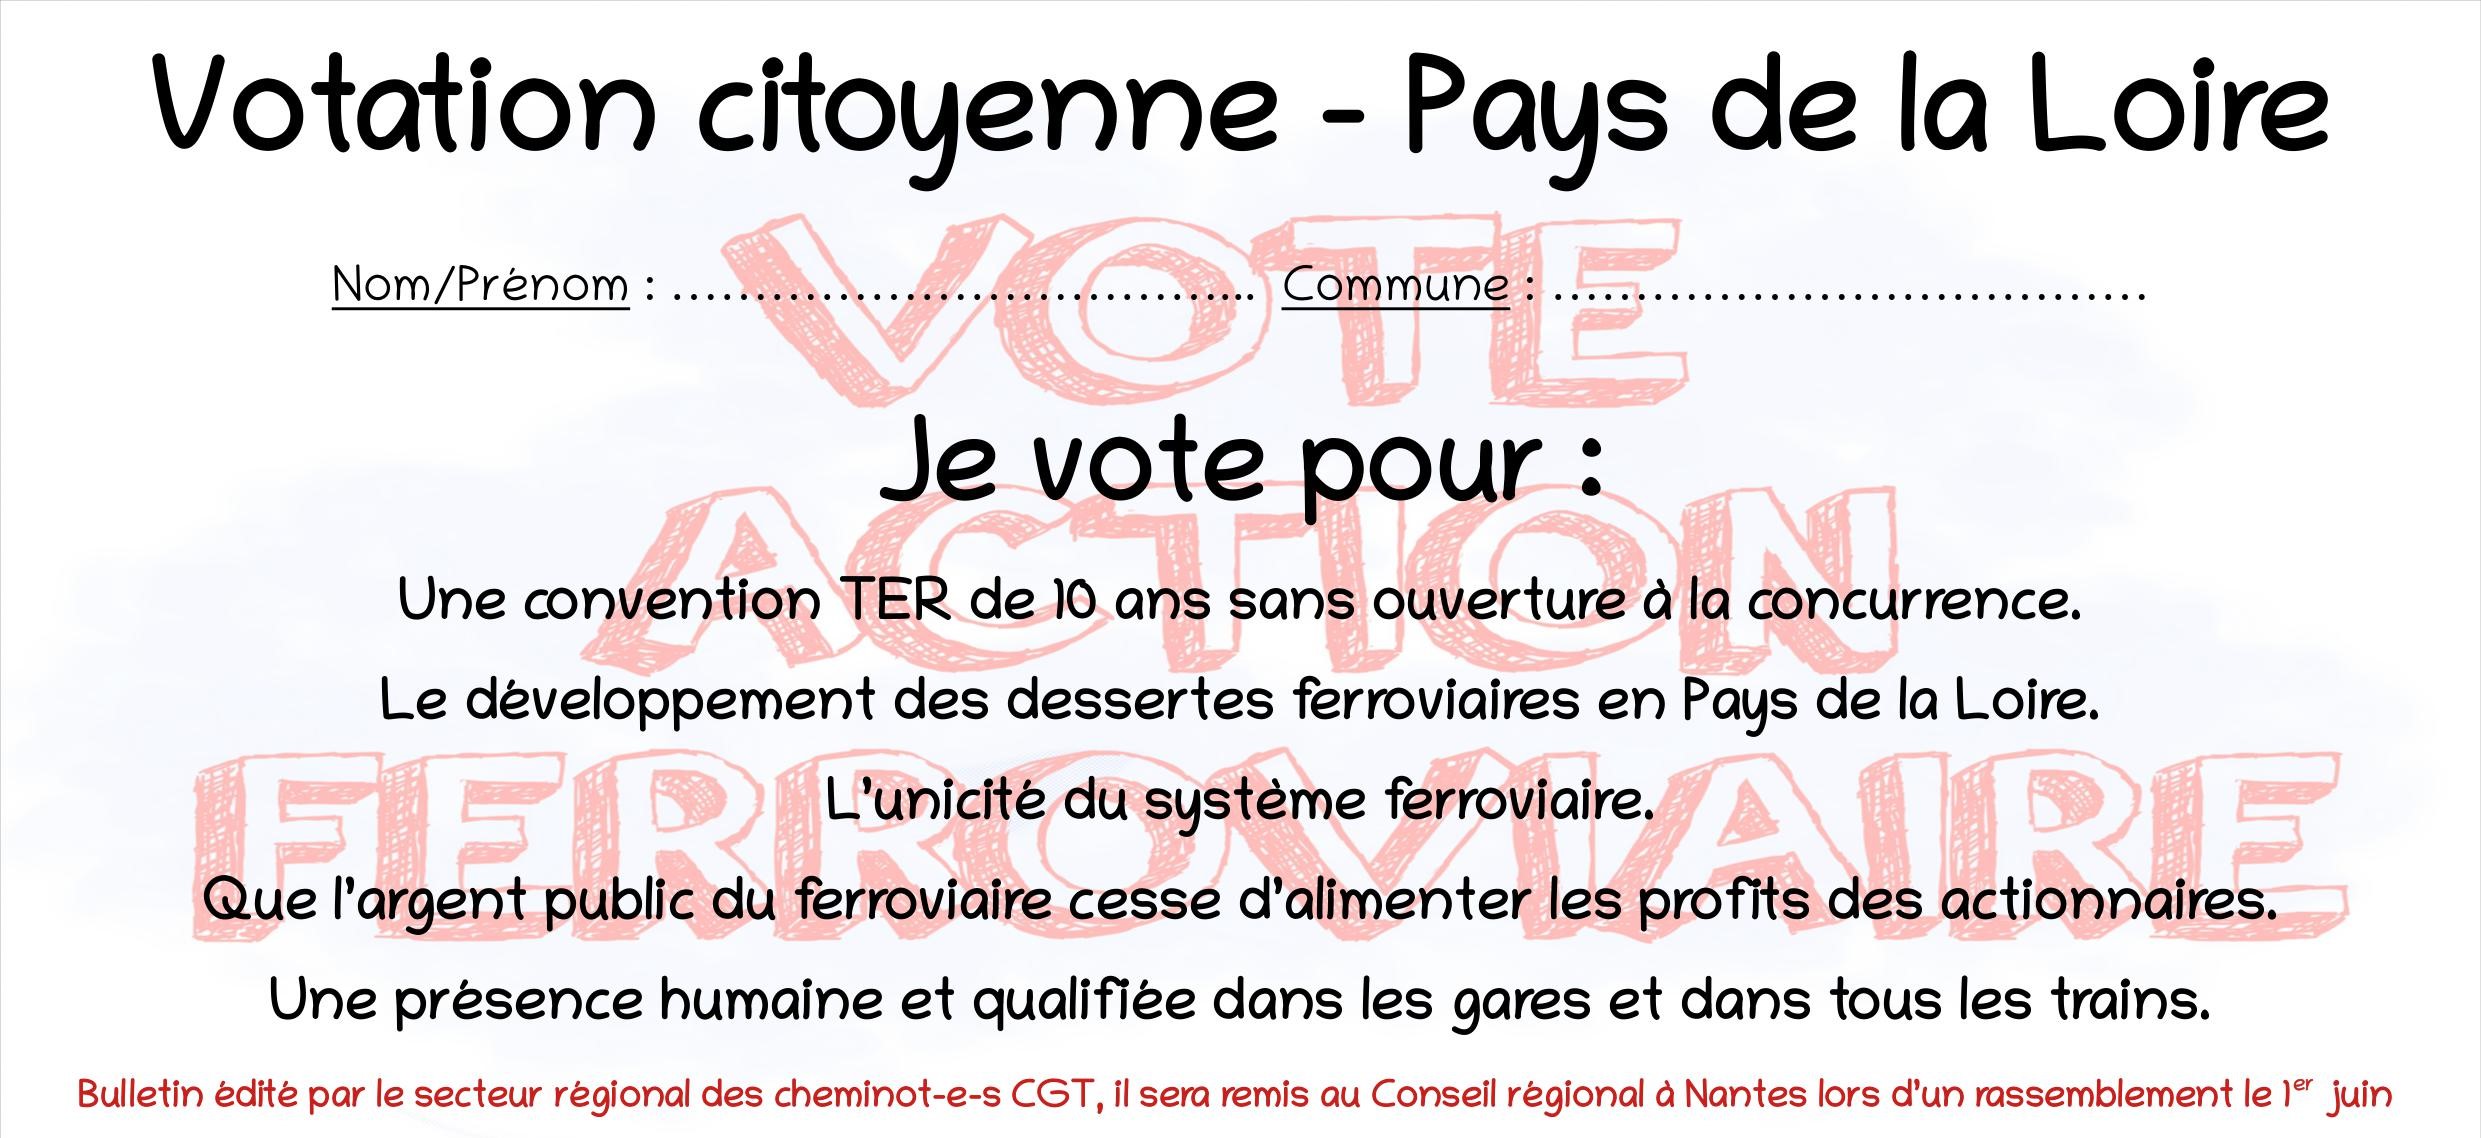 20210420_Votation_citoyenne_convention_TER_PDL_page-00013.jpg